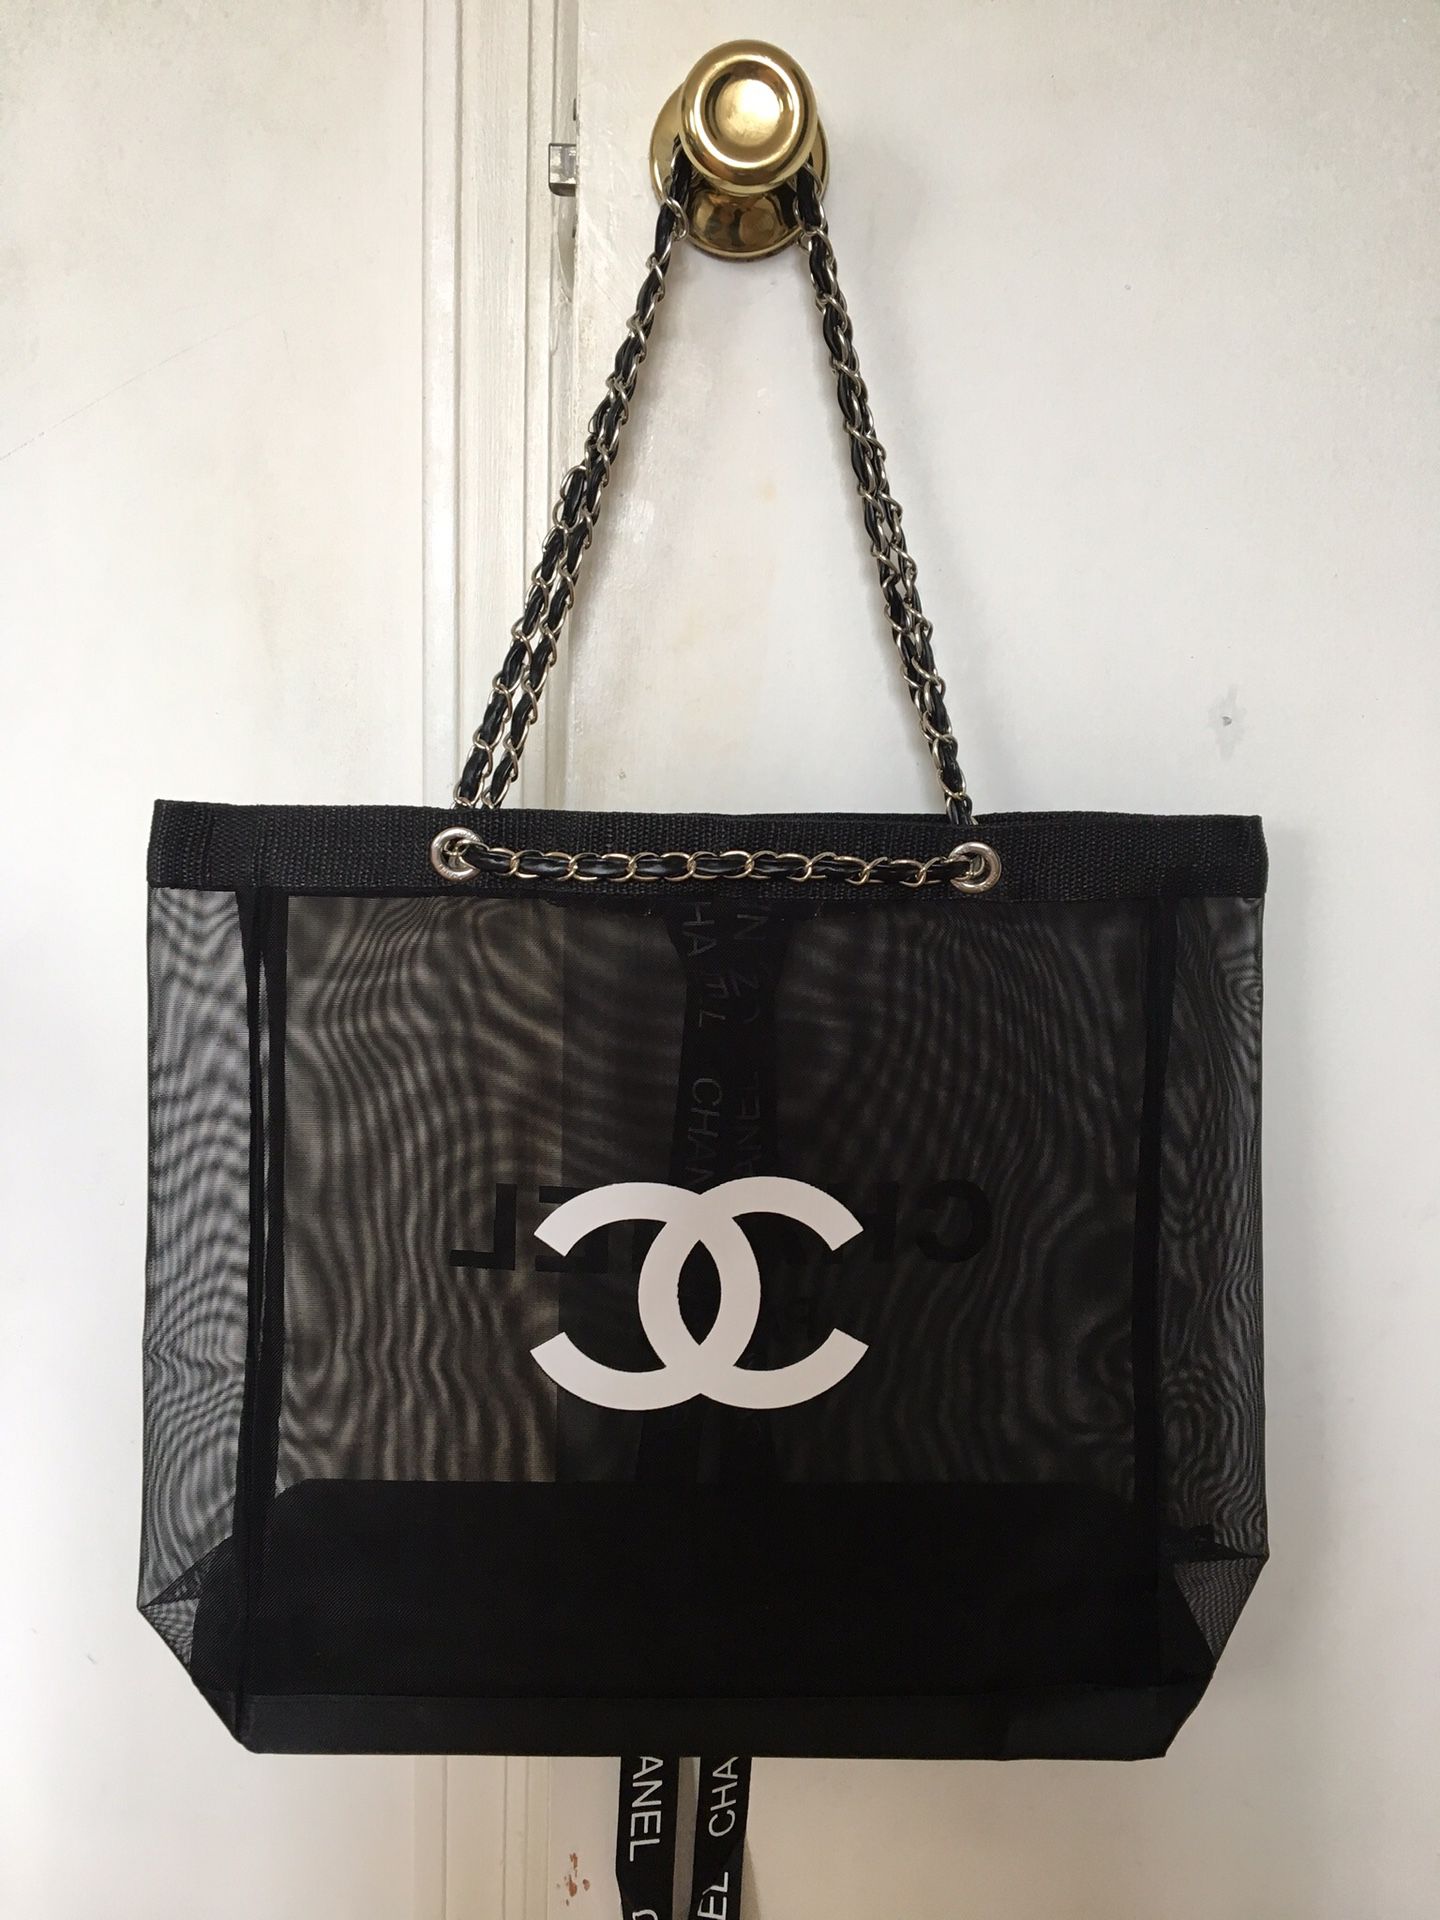 **ONLY 2 LEFT** Authentic BRAND NEW/ NEVER USED VIP GIFT Chanel Mesh Tote!